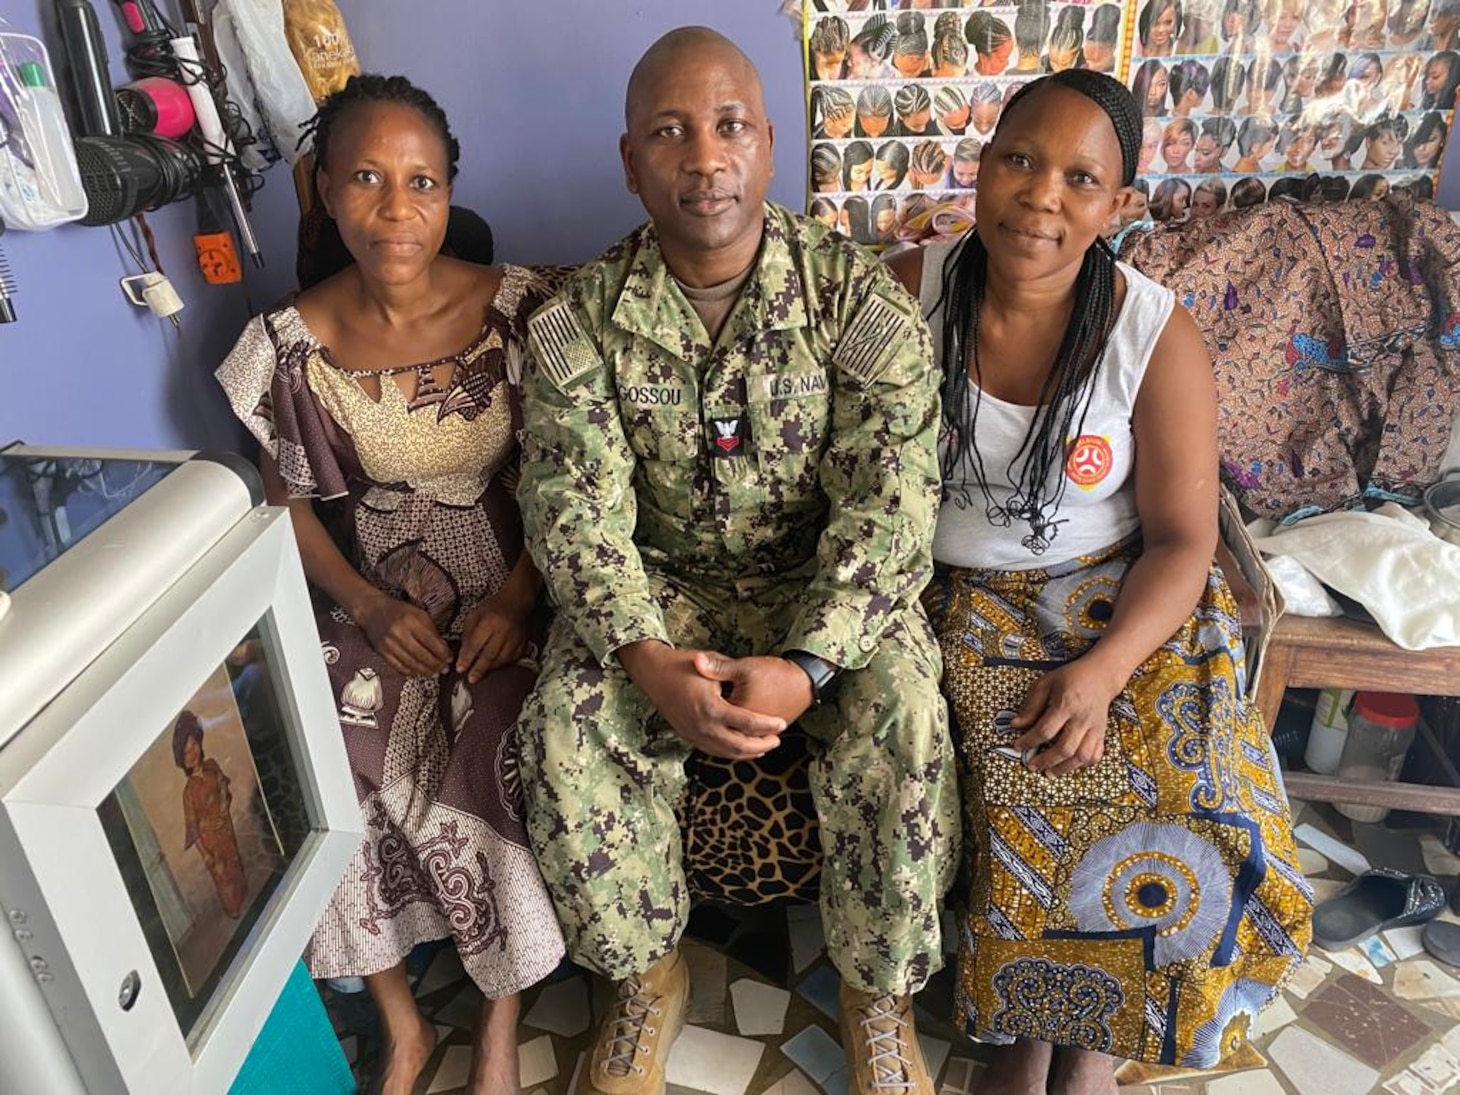 230130-N-NO901-1003 (Jan. 30, 2023) LAGOS, Nigeria - Hospital Corpsman 1st Class Agossou Marcellin, center, a Benin native, Pharmaceutical doctorate student, and U.S. Navy Reservist, poses for a photo with his sisters Alice Marcellin, left, and Marie in Marie’s beauty shop in Benin during exercise Obangame Express 2023. Obangame Express 2023, conducted by U.S. Naval Forces Africa, is a maritime exercise designed to improve cooperation, and increase maritime safety and security among participating nations in the Gulf of Guinea and Southern Atlantic Ocean. U.S. Sixth Fleet, headquartered in Naples, Italy, conducts the full spectrum of joint and naval operations, often in concert with allied and interagency partners, in order to advance U.S. national interests and security and stability in Europe and Africa. (Courtesy Photo)